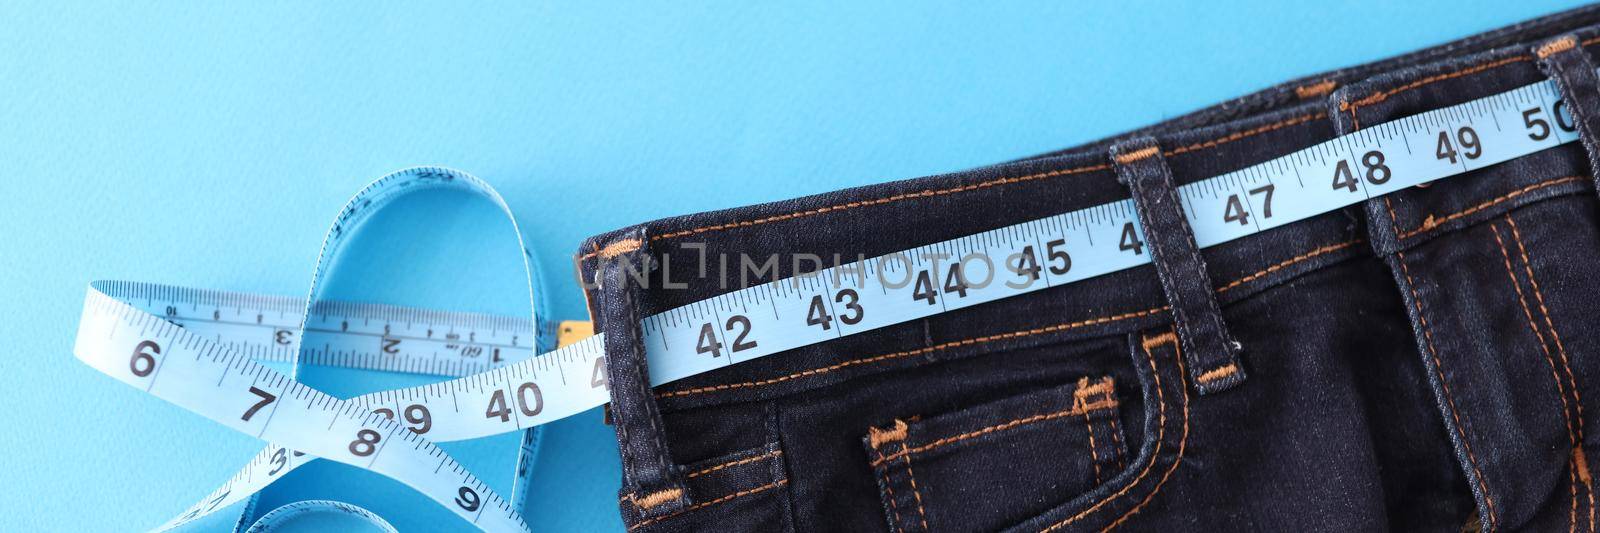 Measuring sewing tape lies on jeans, close-up by kuprevich